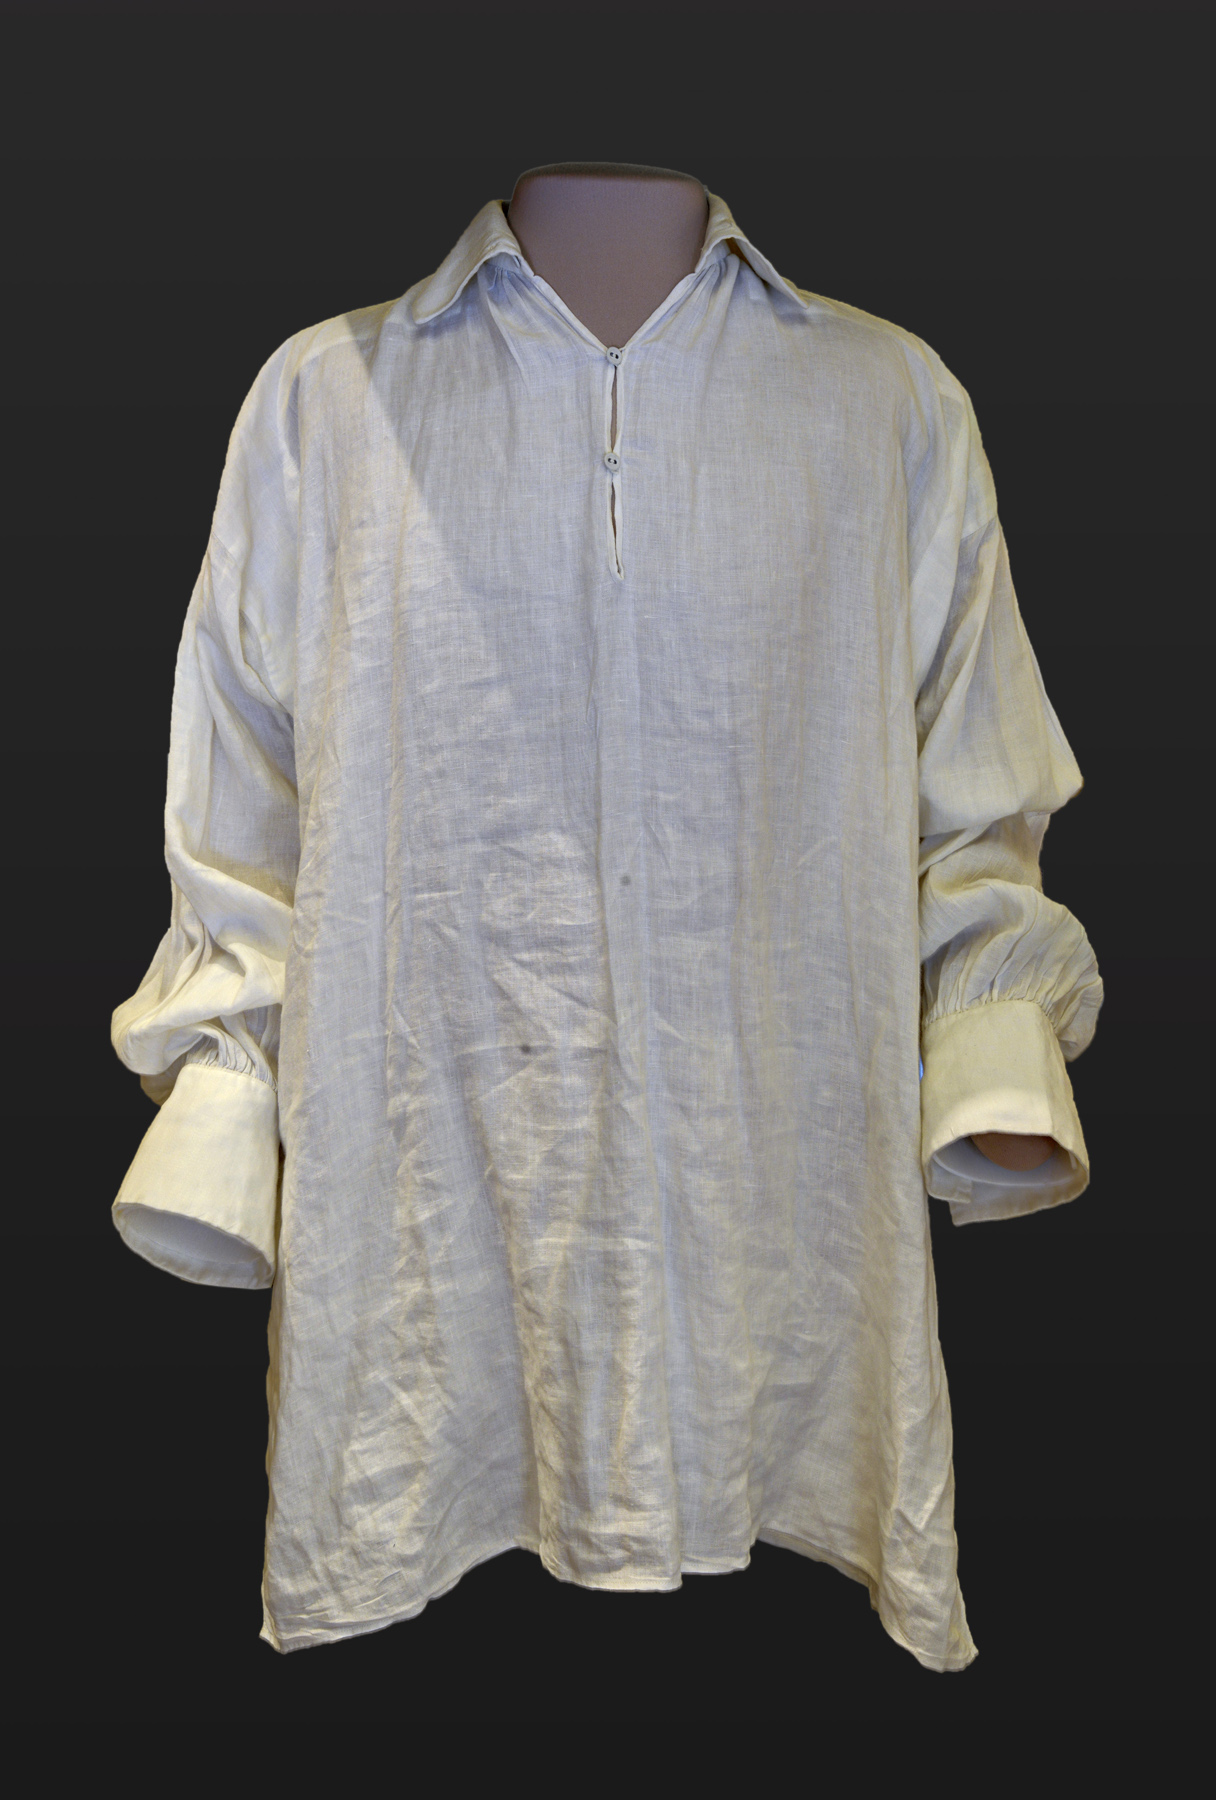 The shirt worn by actor Colin Firth during his portrayal of Mr. Darcy as he emerged from the Pemberley pond in the BBC’s 1995 Pride and Prejudice production